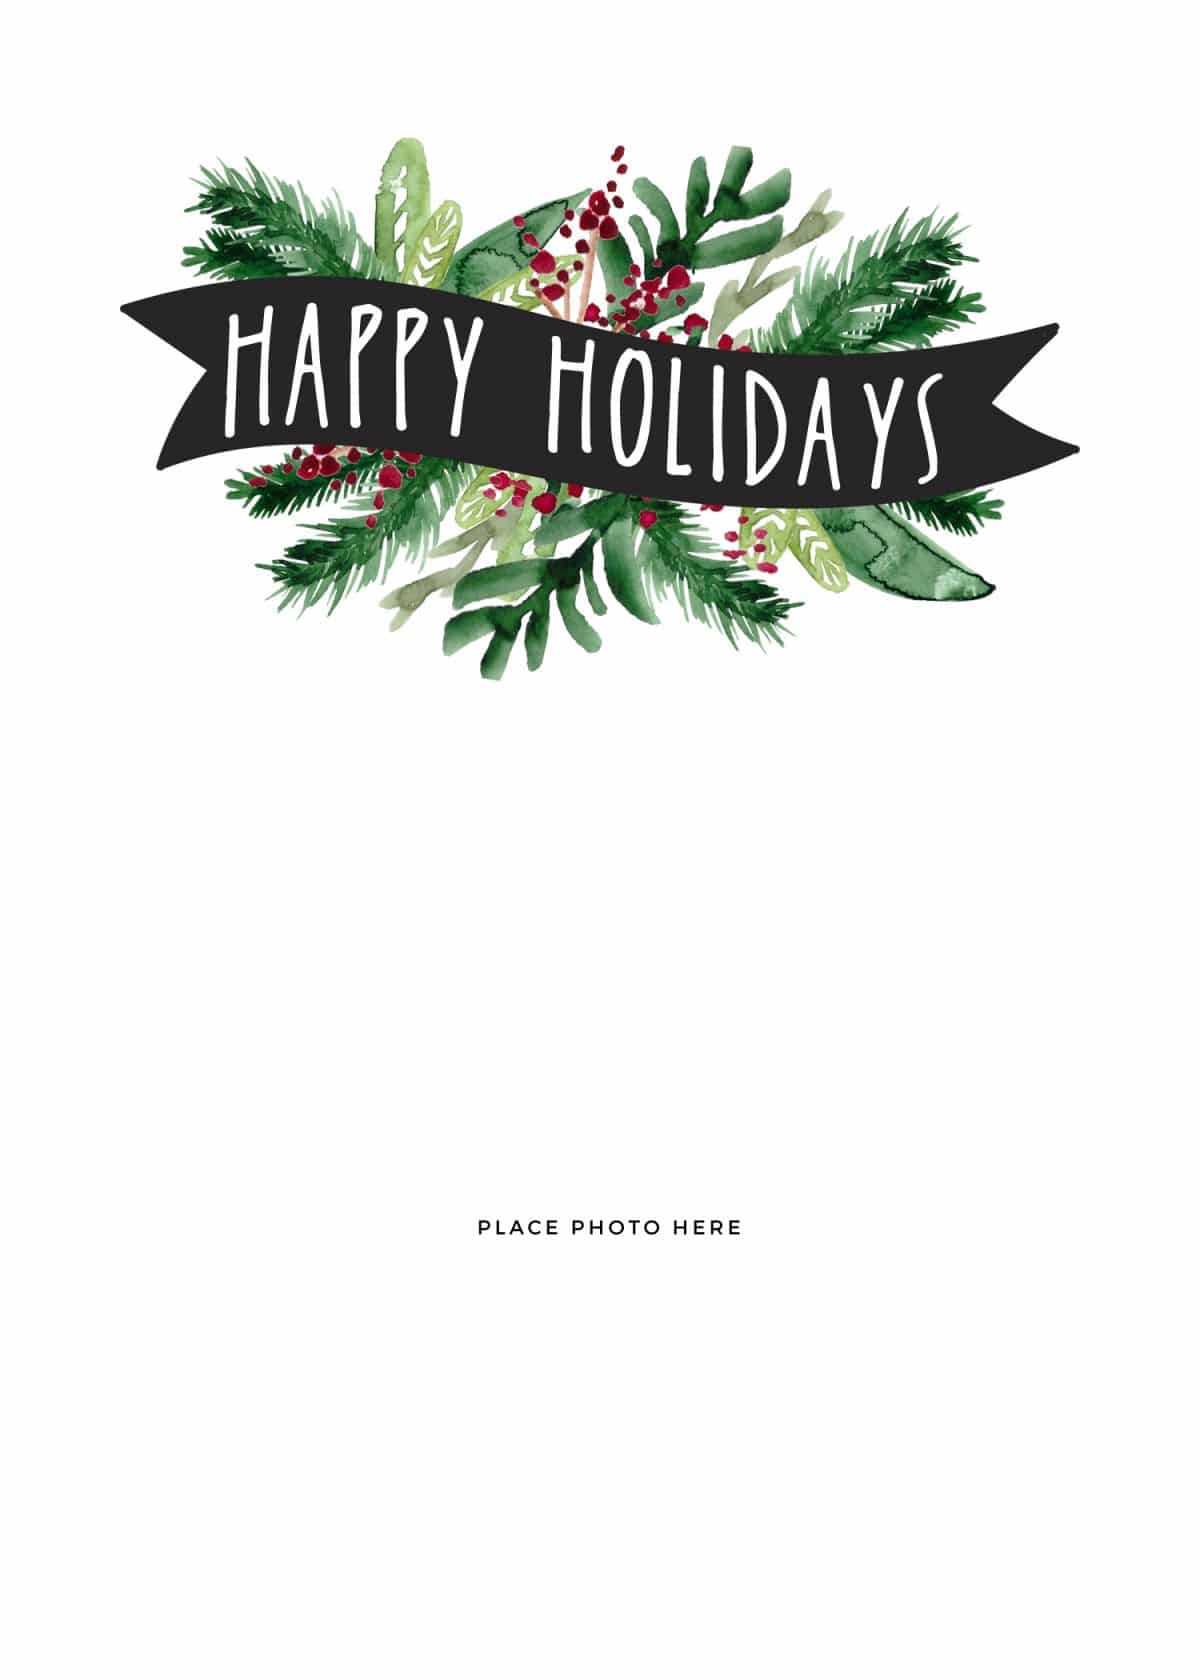 Make Your Own Photo Christmas Cards (For Free!) - Somewhat In Happy Holidays Card Template